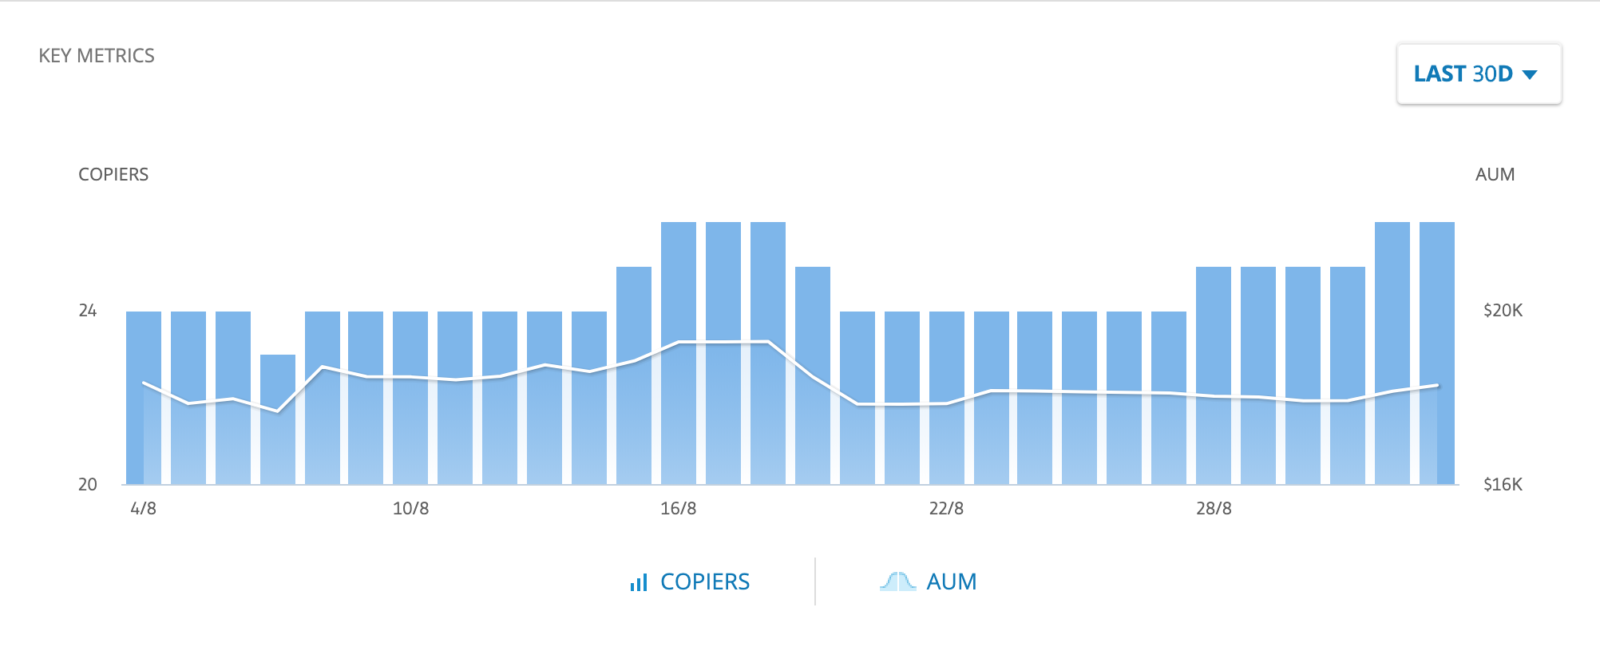 the chart showing copiers and AUM per day on eToro